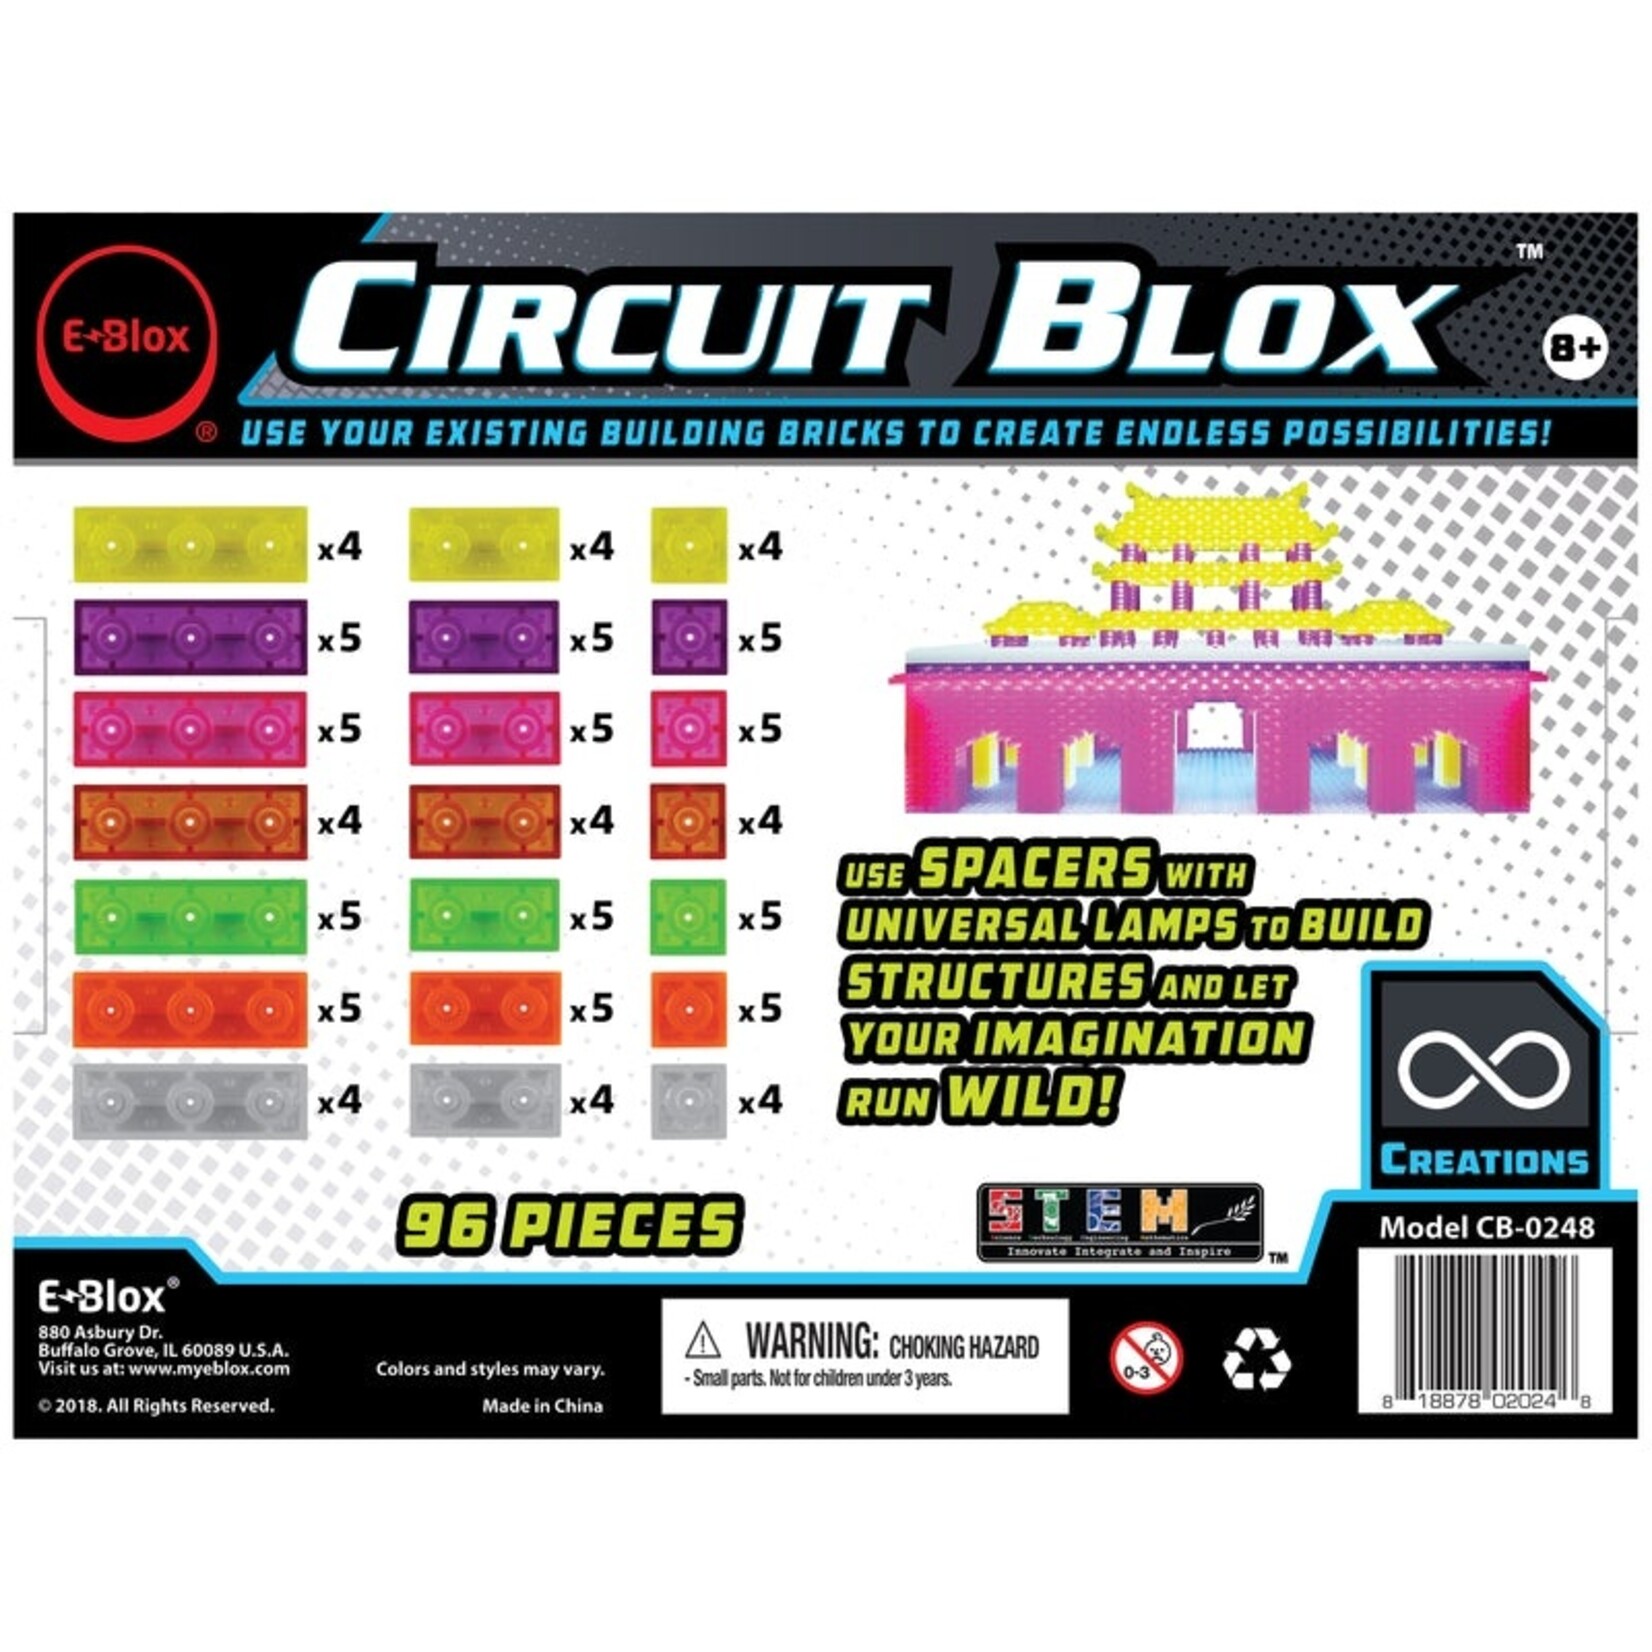 E-Blox Circuit Blox Spacers - 96 pc Add on